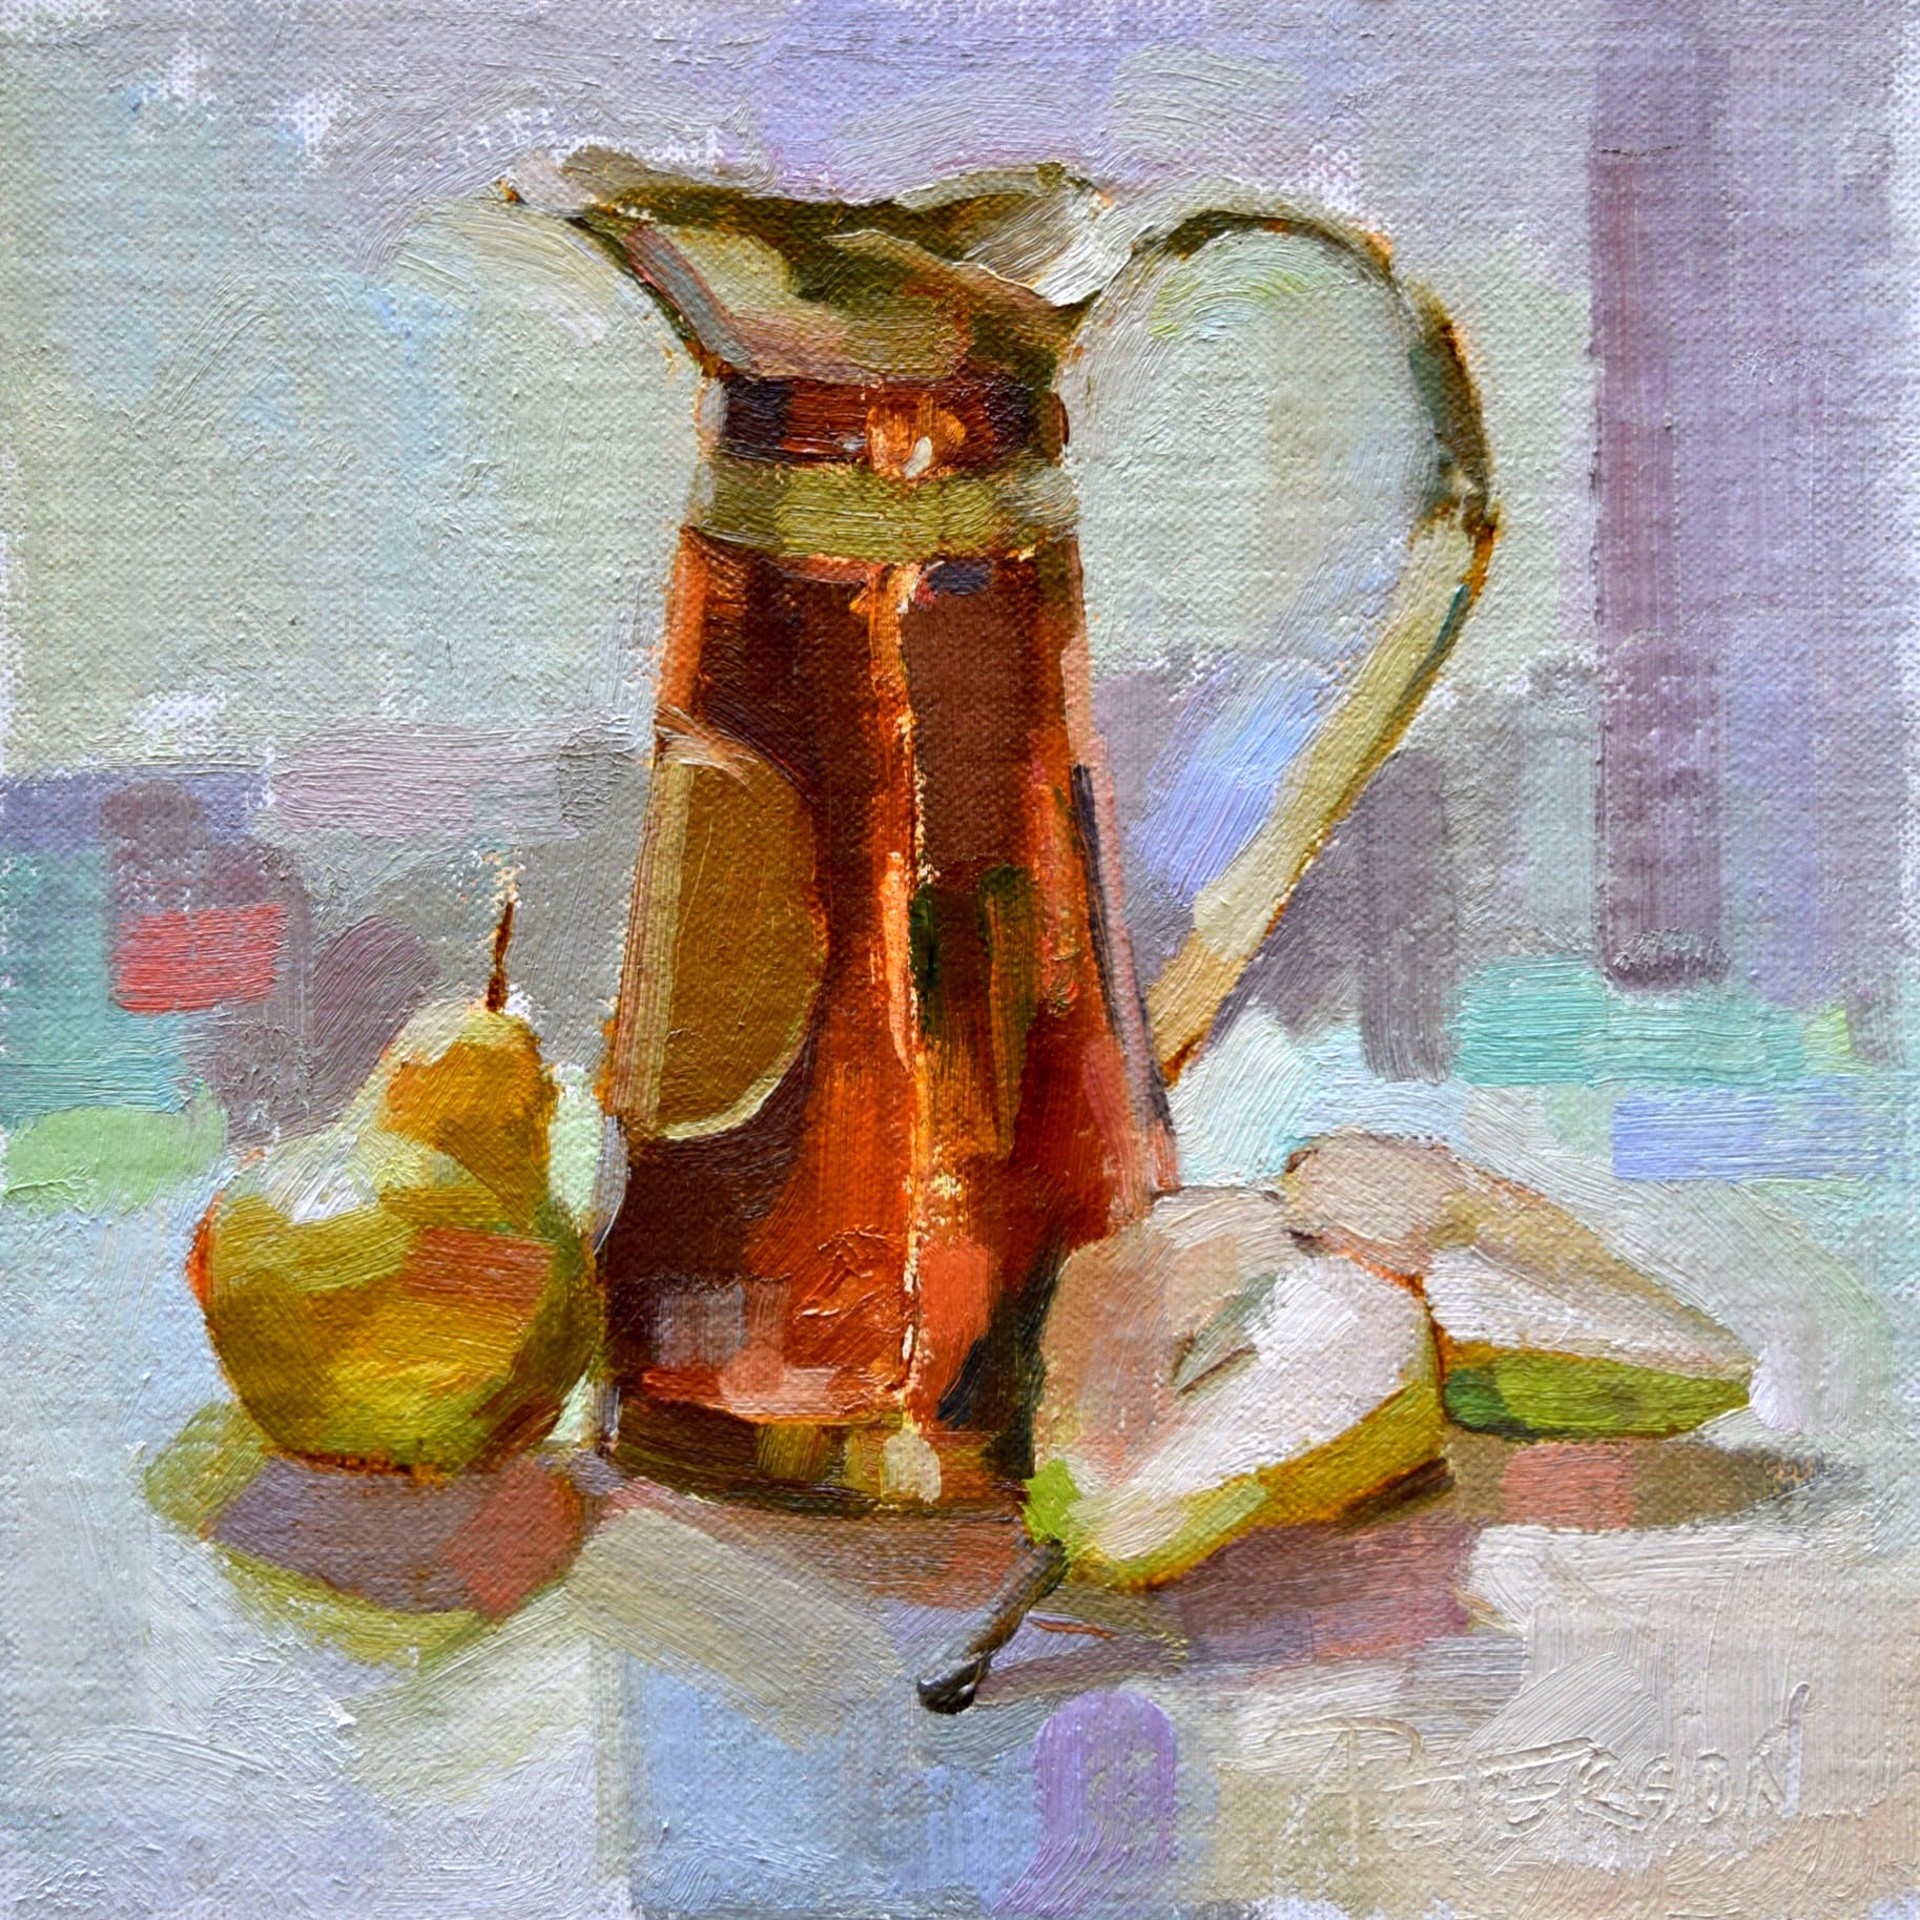 Pitcher, Pears, and Periwinkle by Amy R. Peterson